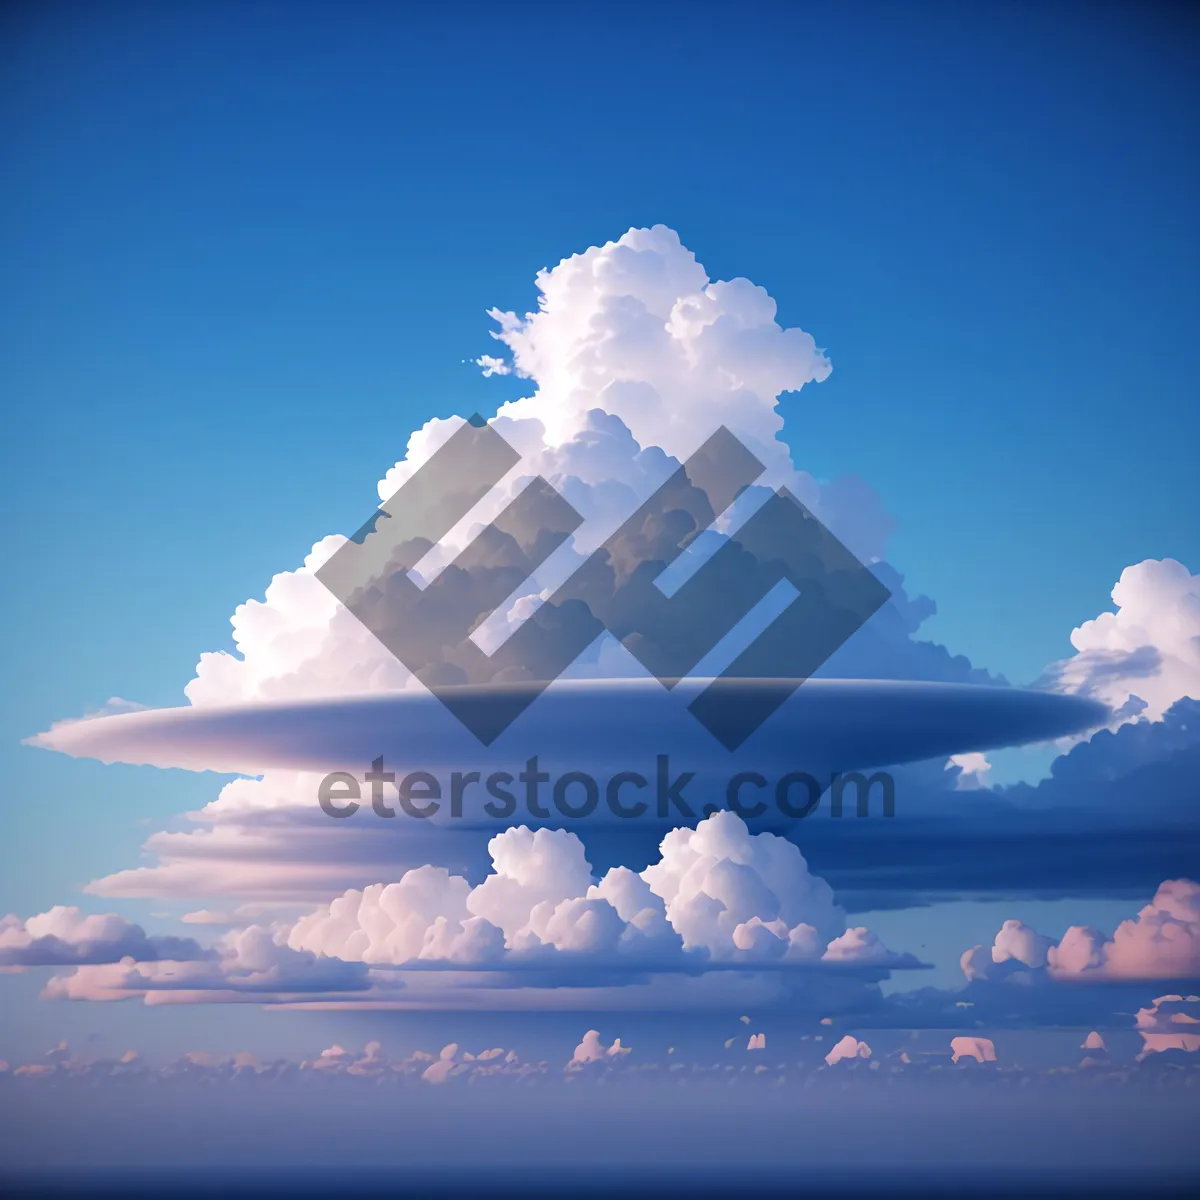 Picture of Skybound Iceberg Under Heavenly Clouds